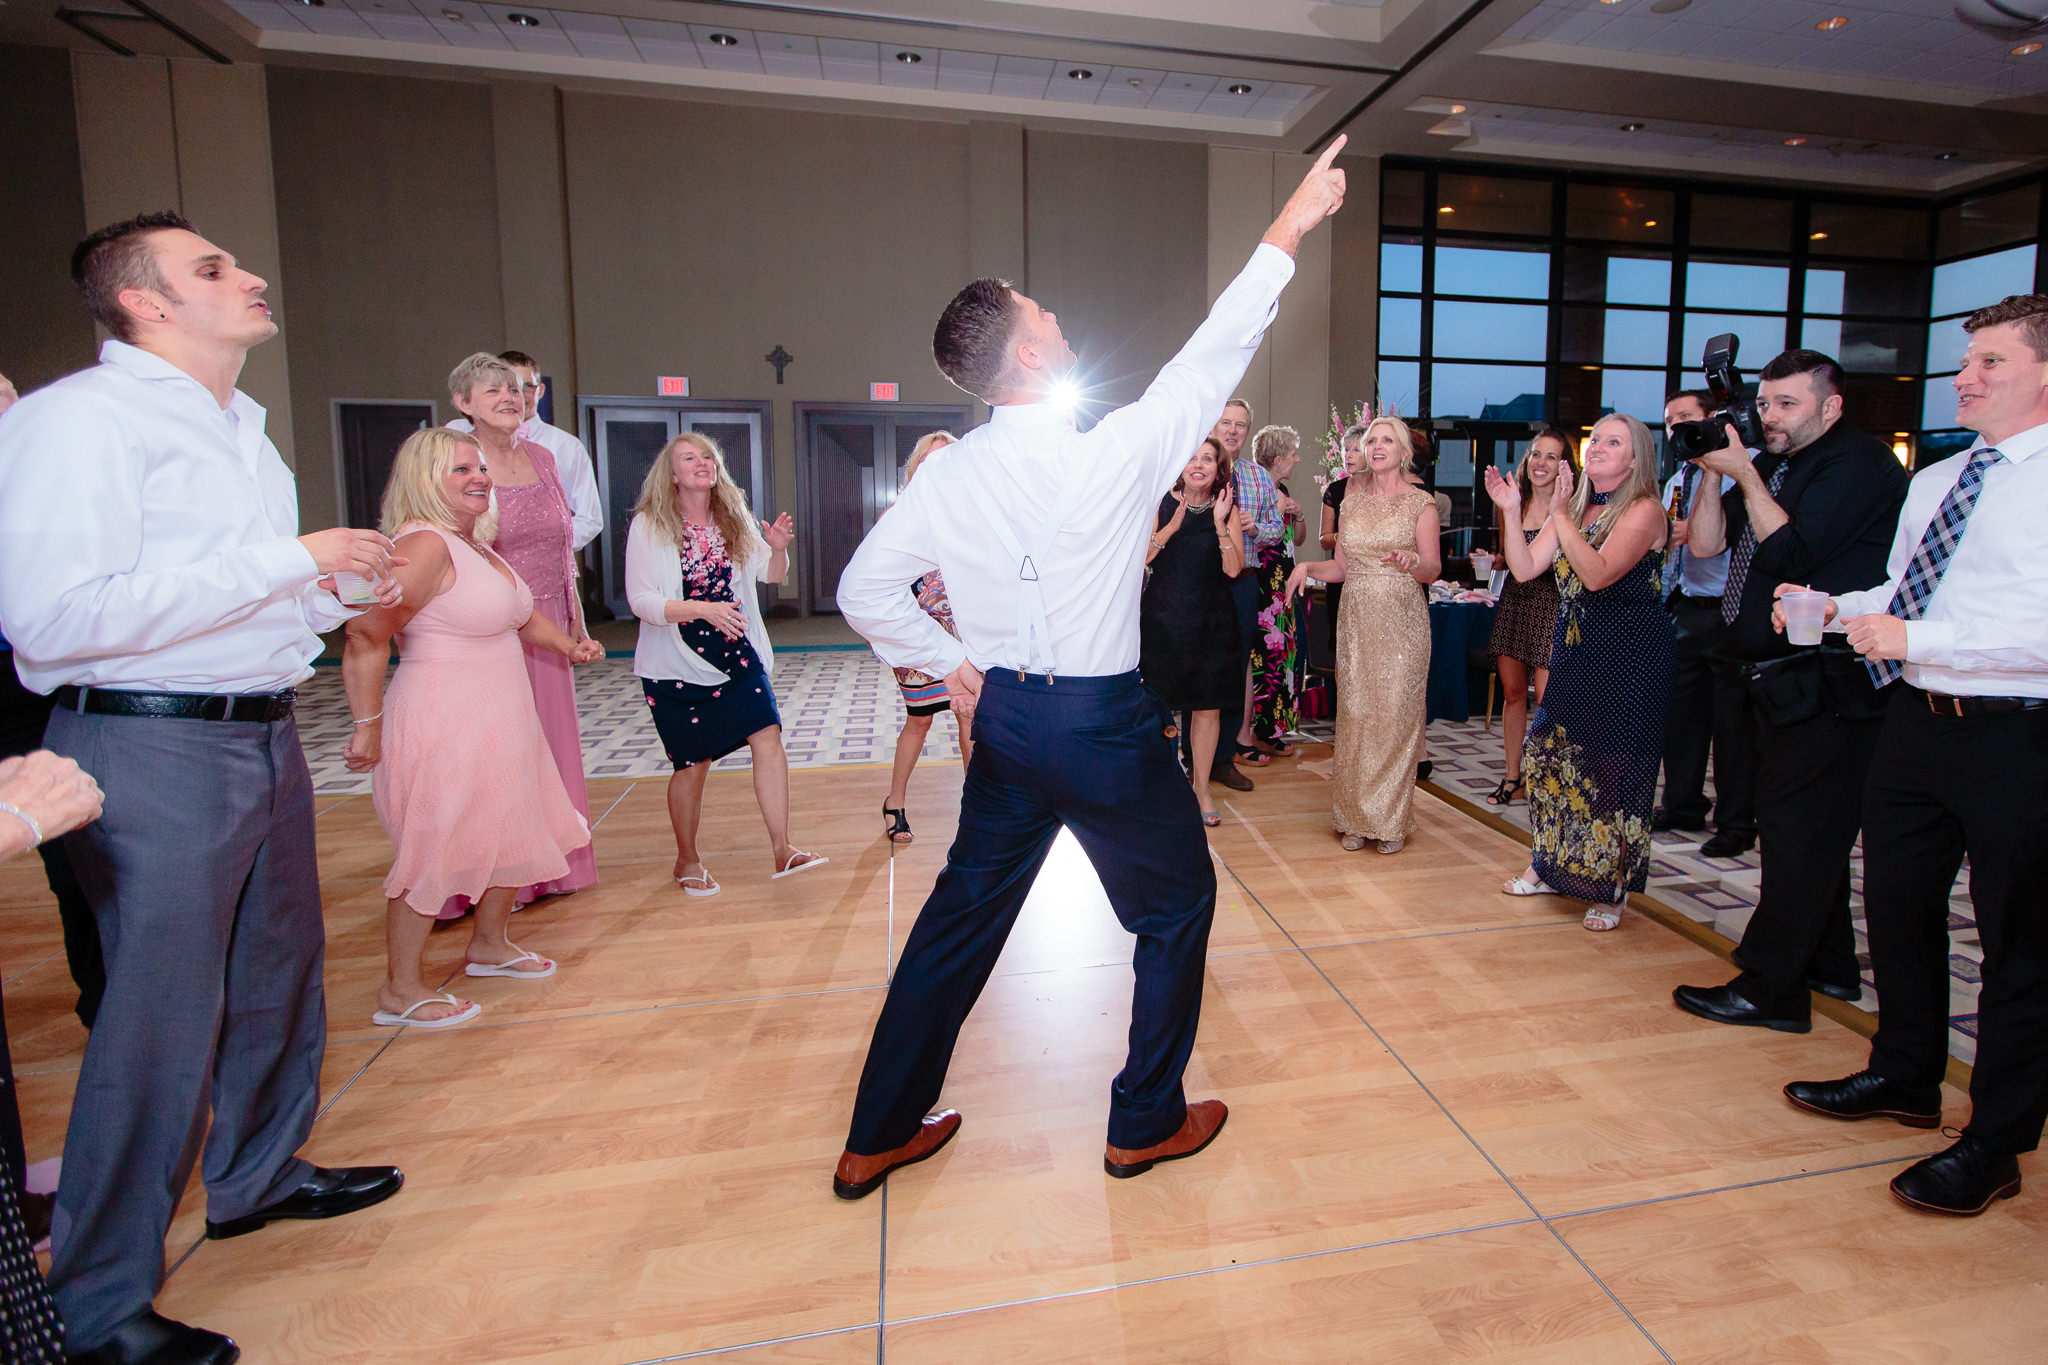 Brother of the bride busts a move at at Duquesne University wedding reception